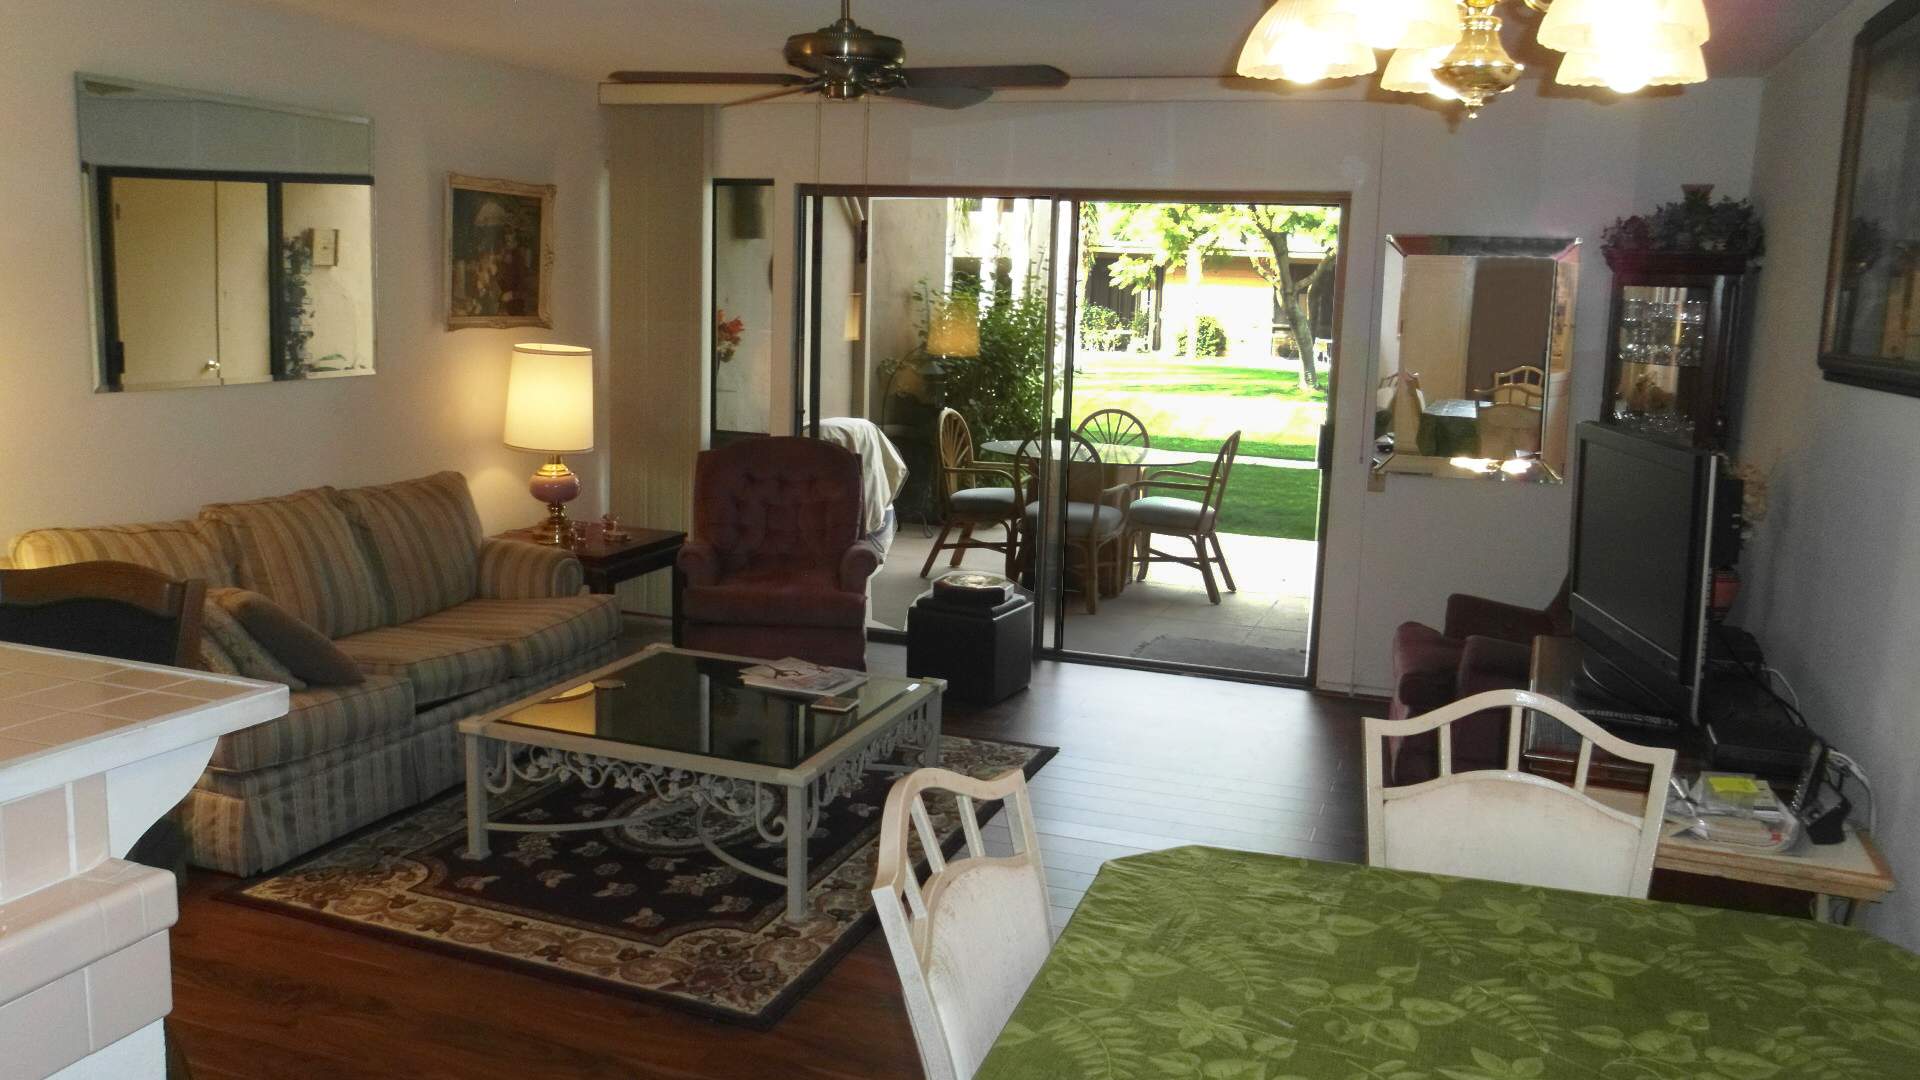 Living Room with Sofa, chair, coffee table, and TV.  Dining room talble and 2 chairs are in the front right and back patio can be seen through glass sliding doors.